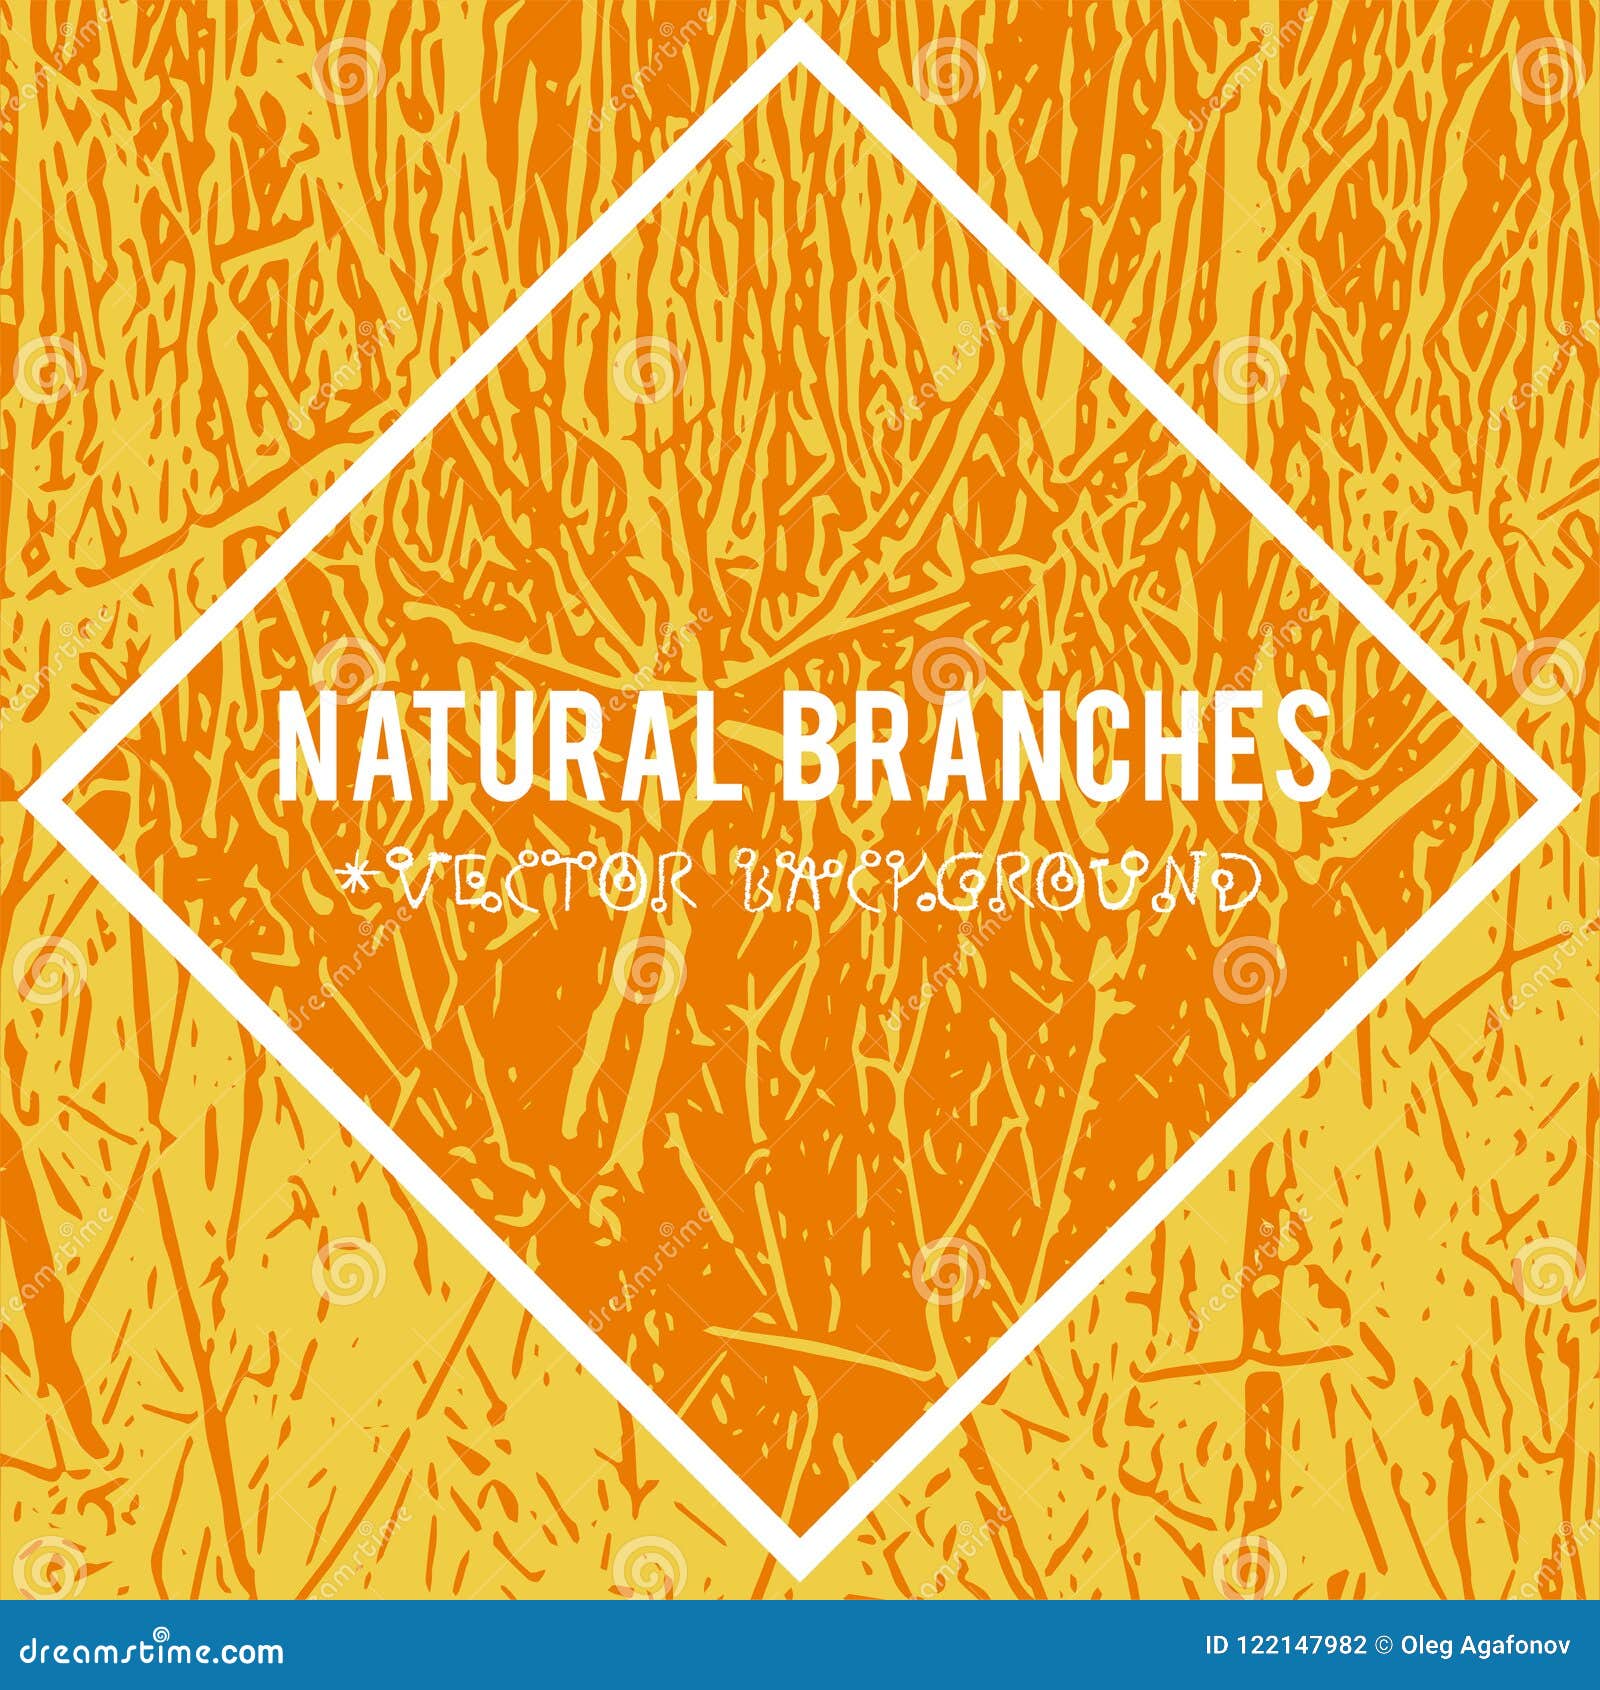 Natural Branches Vector Textured Background and Eco Grunge Items for